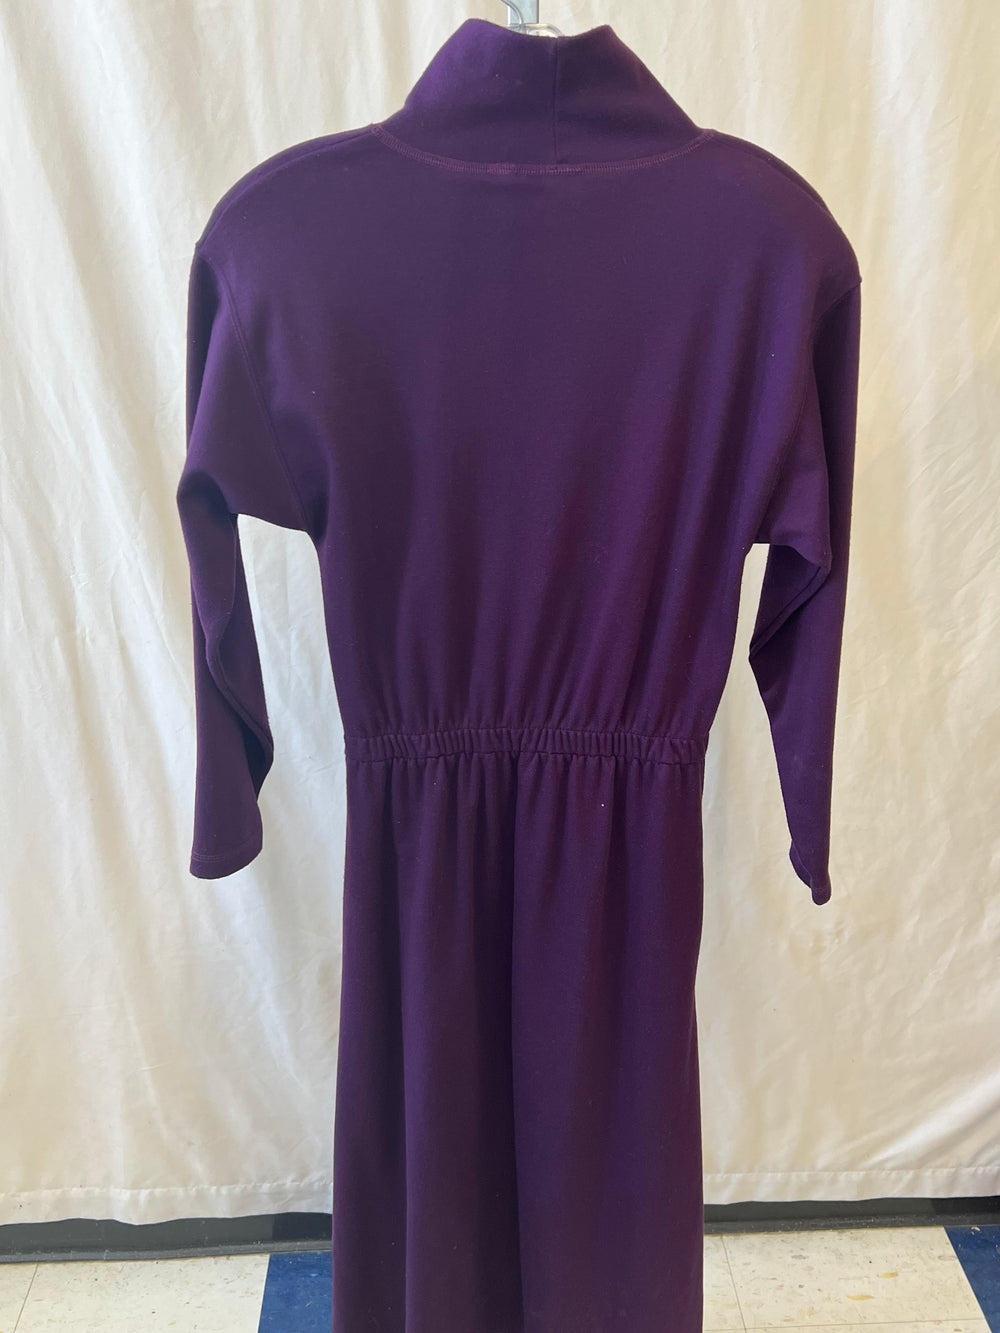 LL Bean Small Purple Long Dresses with Long Sleeves